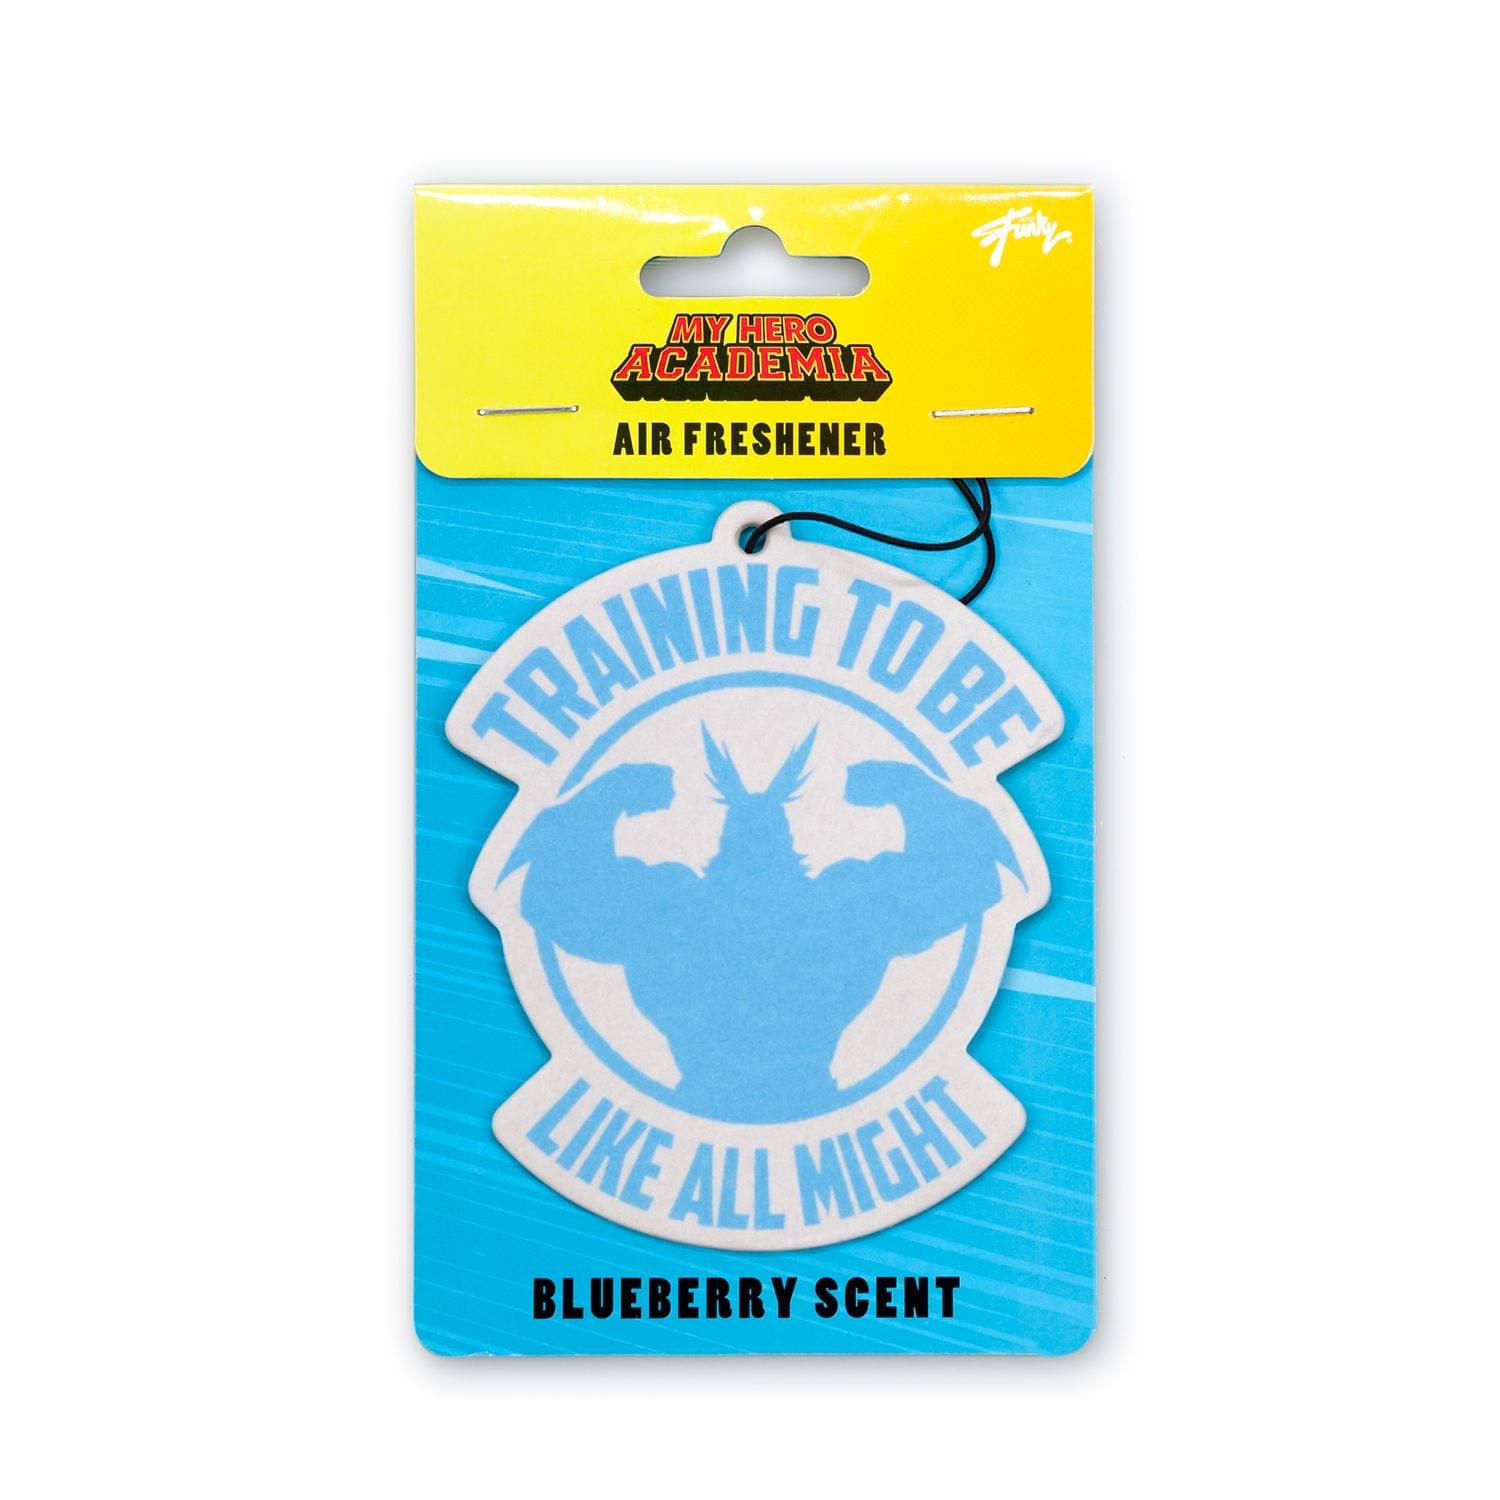 OFFICIAL My Hero Academia Air Freshener | Features All Might | Blueberry Scented